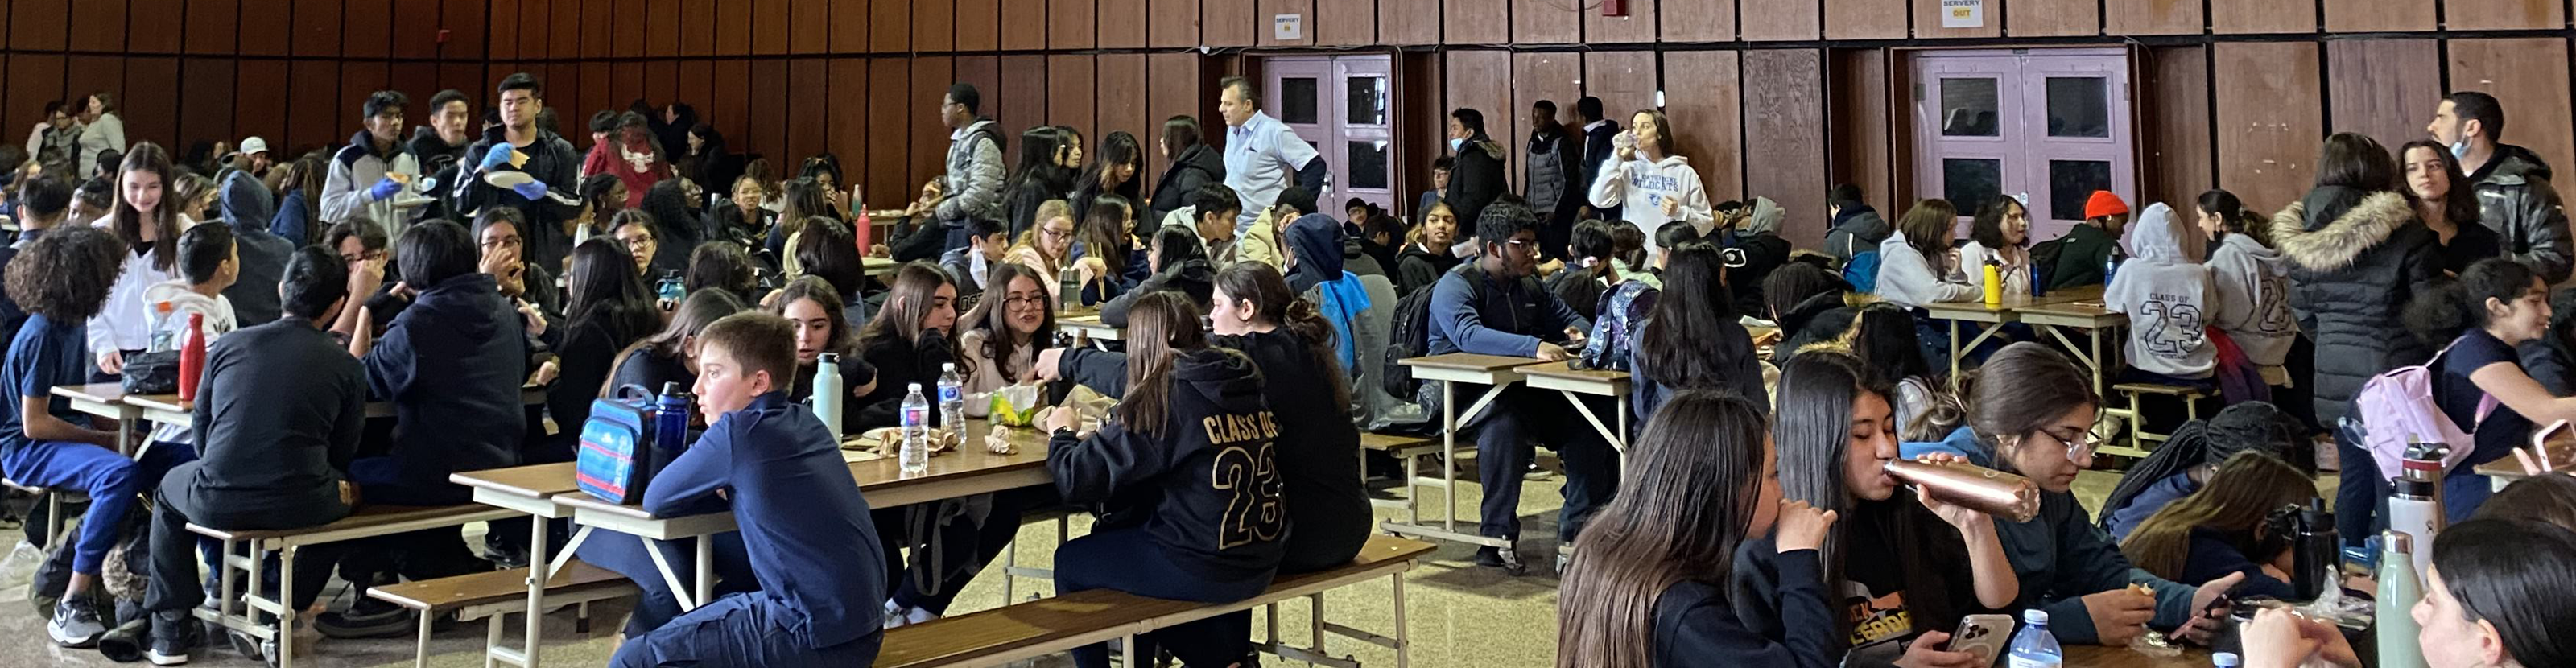 Photo of students attending the i-LITE conference sitting around long tables and eating lunch together.